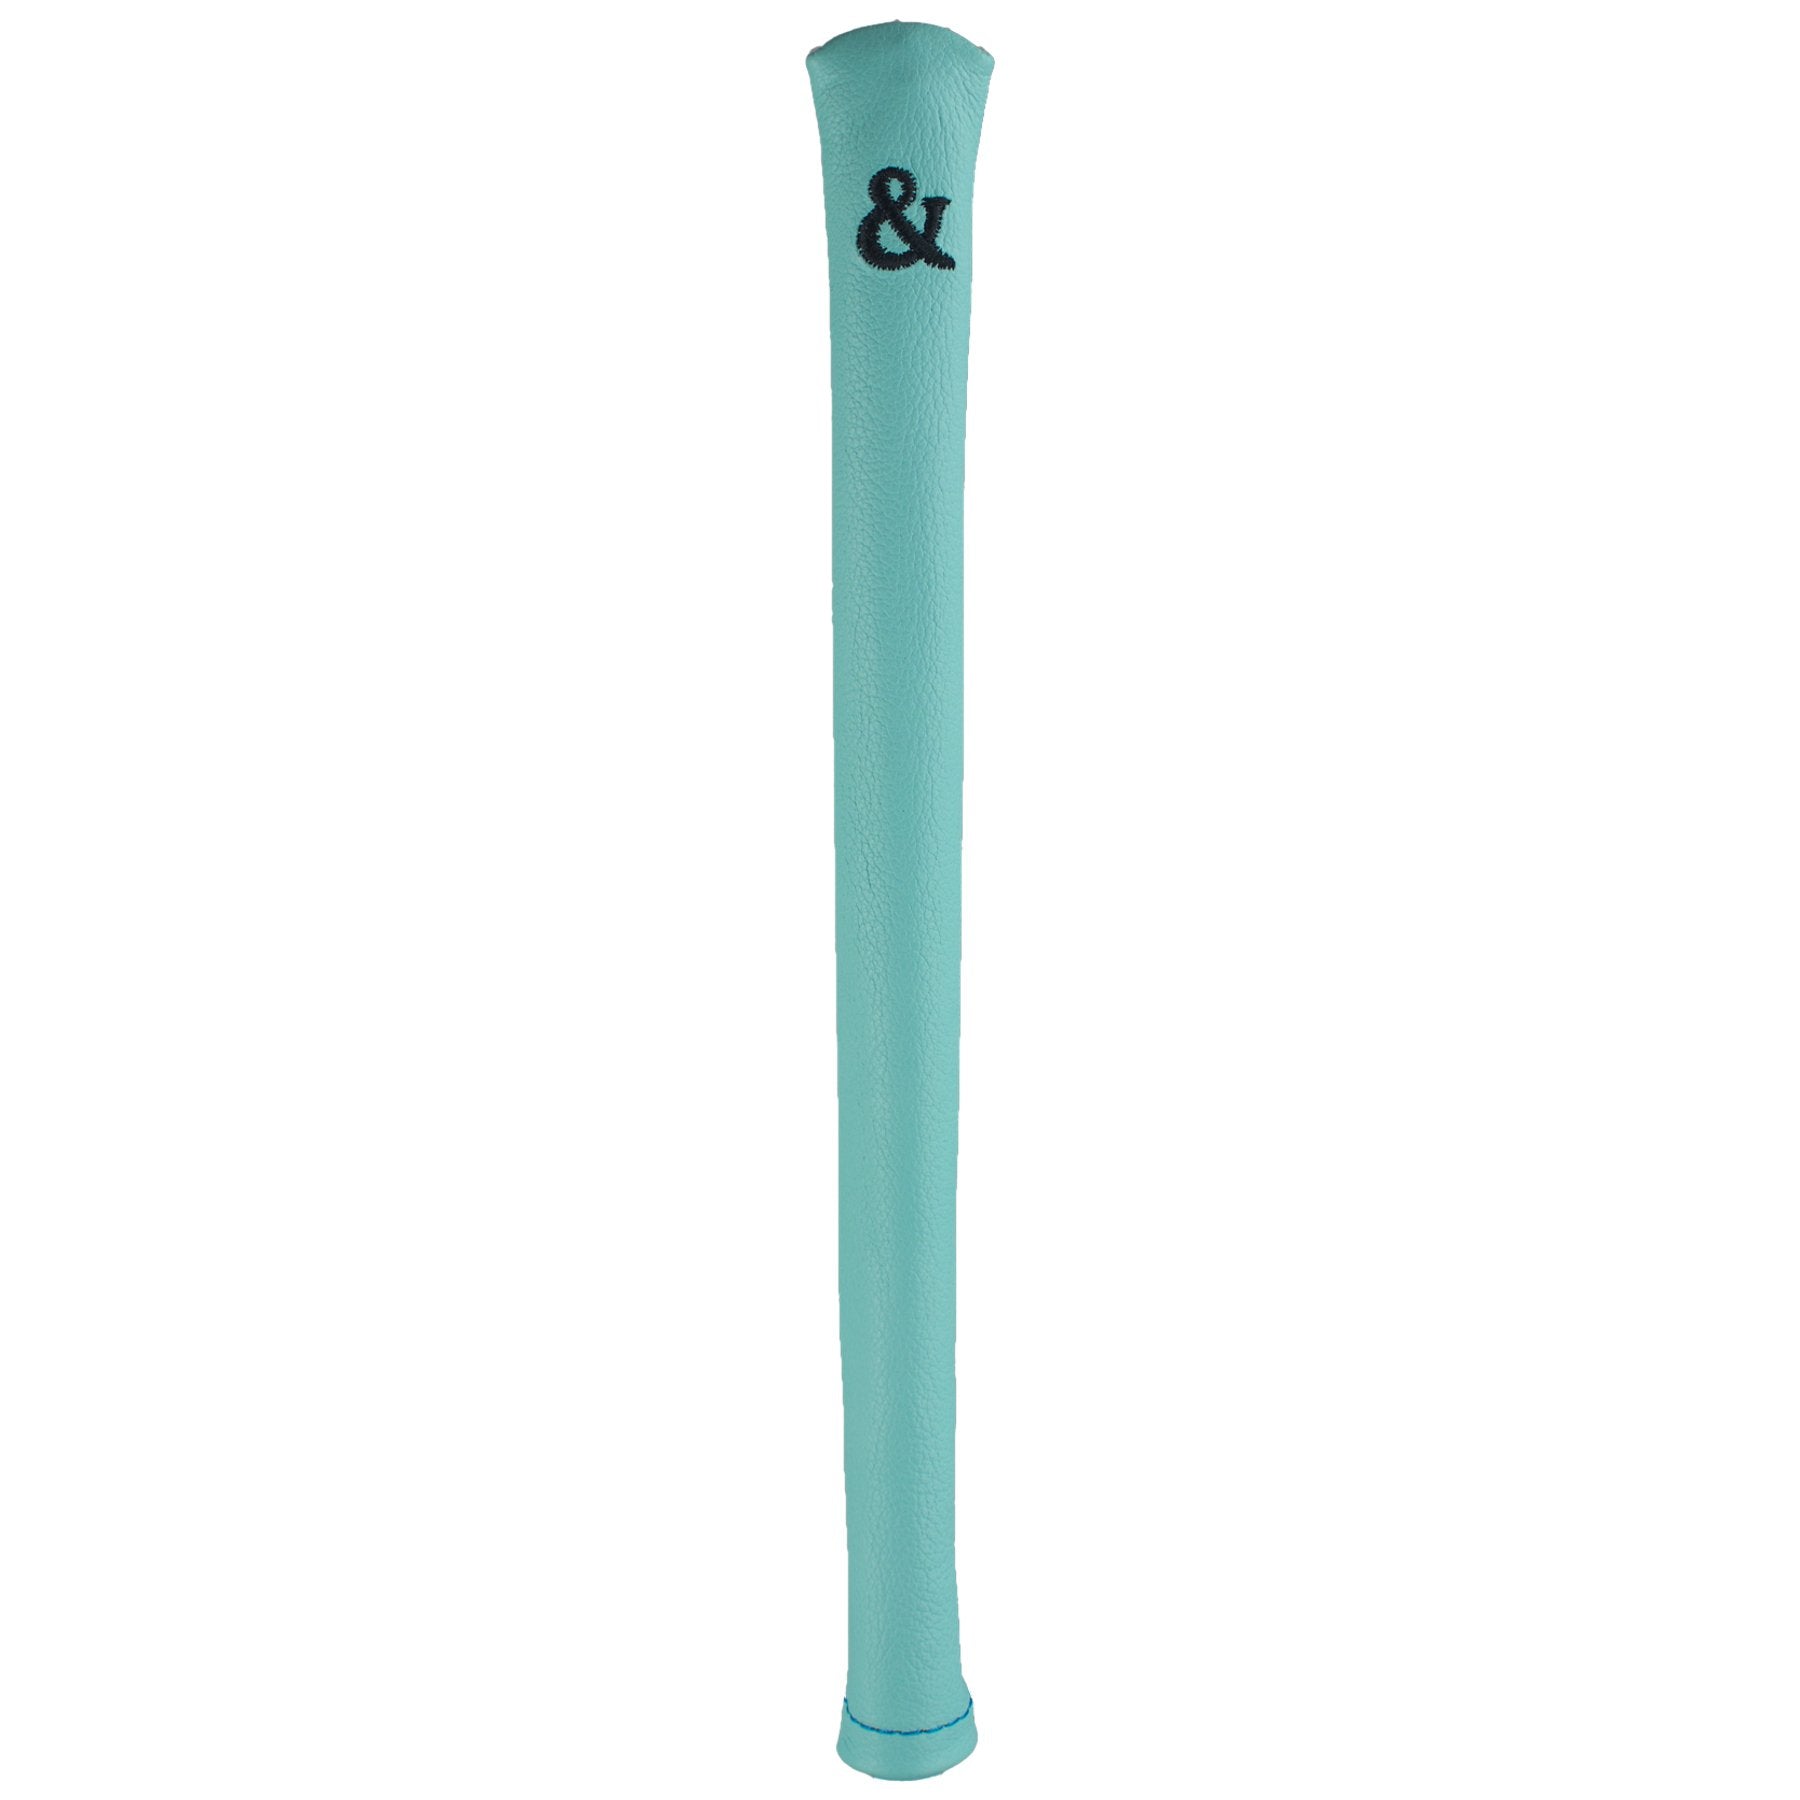 Robin Egg Blue Leather Alignment Stick Cover - -